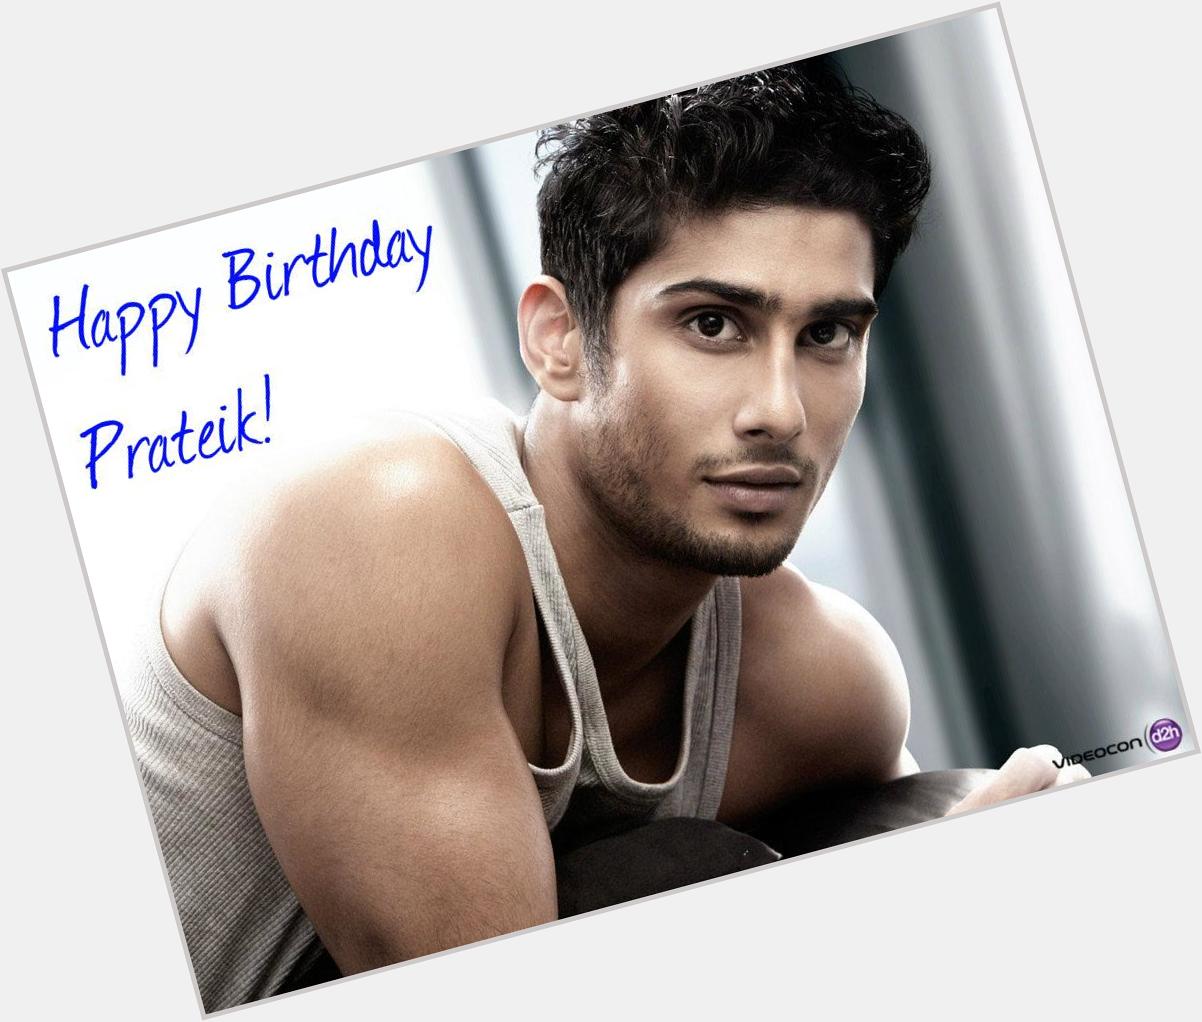 Happy Birthday Prateik Babbar!
Join us in wishing the Dhobi Ghaat actor an exciting year ahead. 